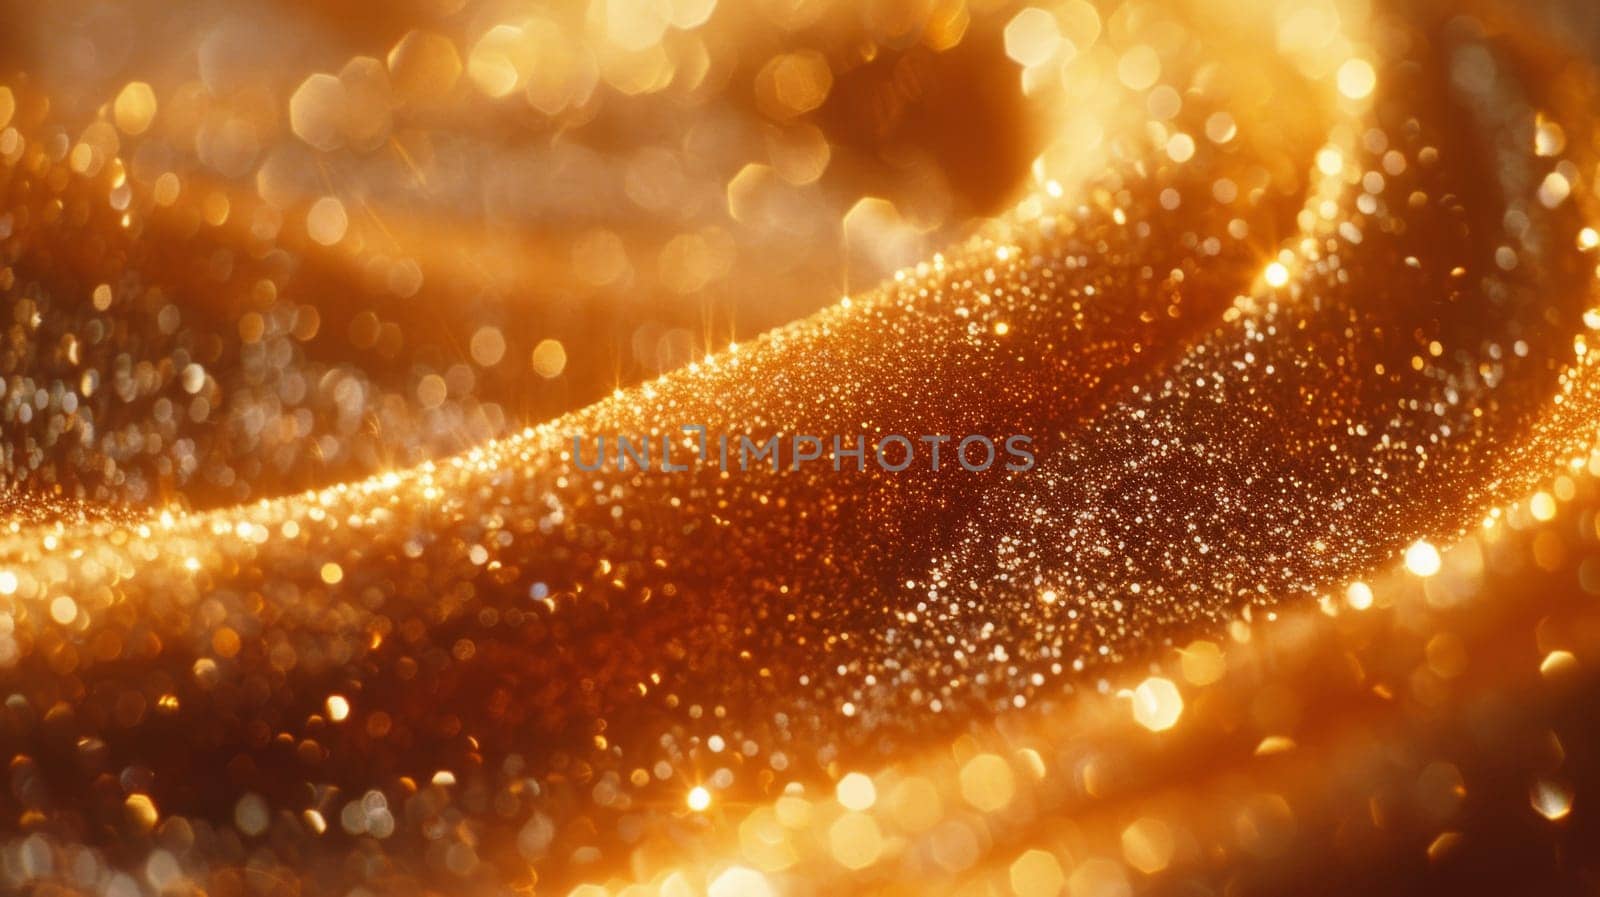 A close up of a shiny gold fabric with some sparkles